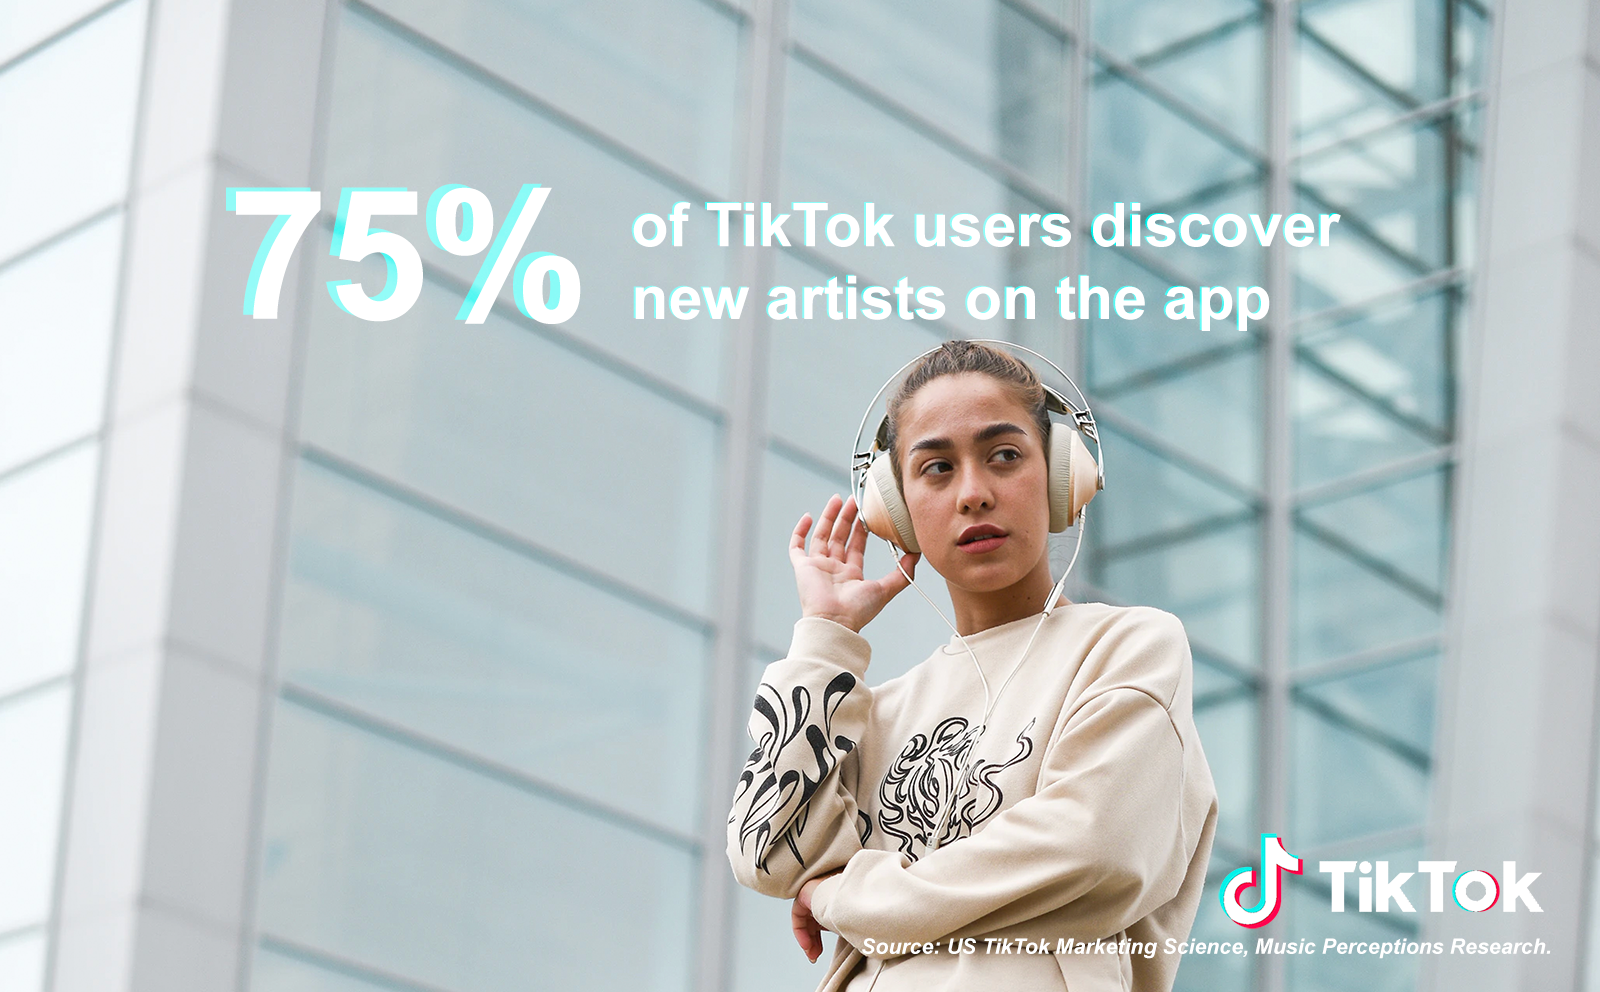 Study shows 75% of TikTok users discover new artists on the app